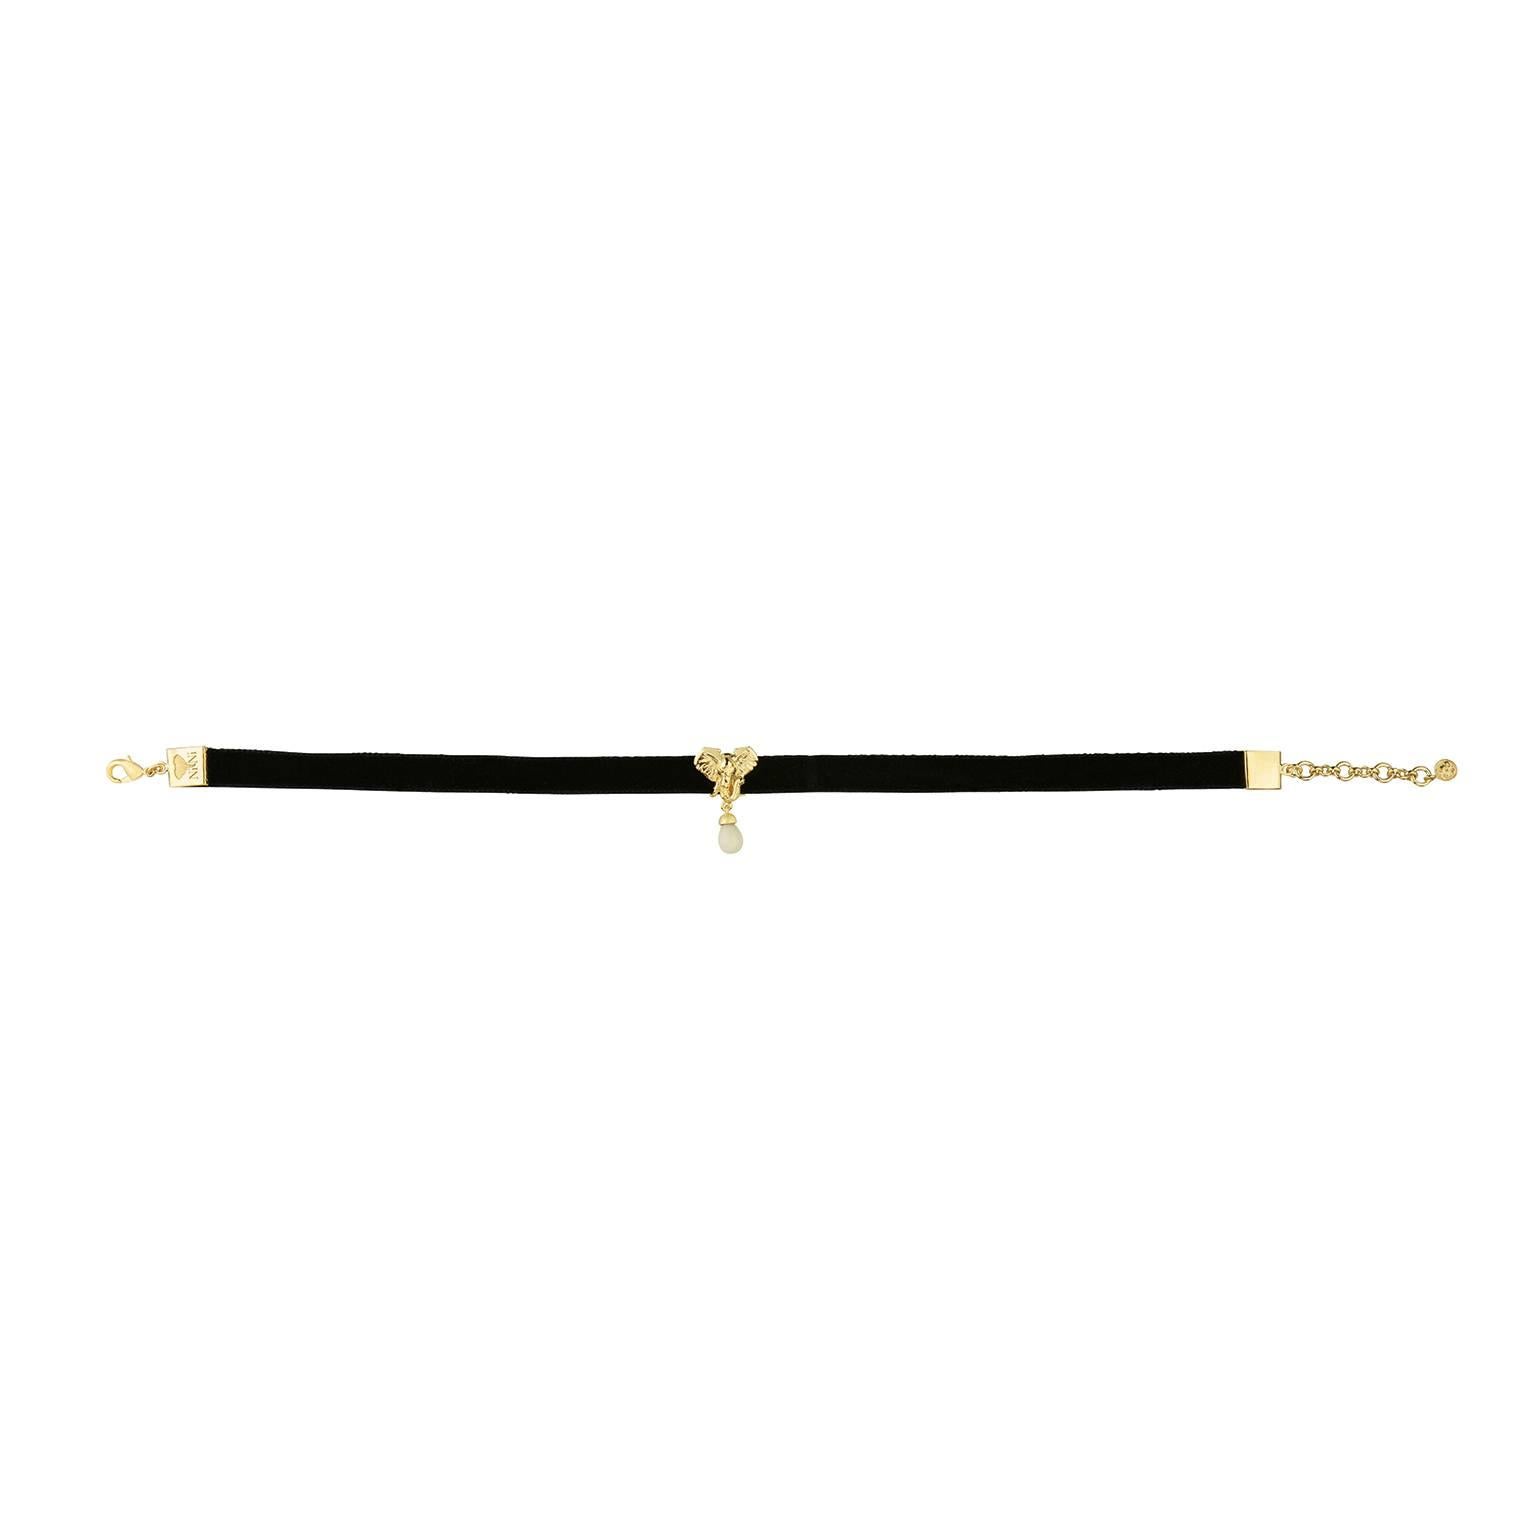 Contemporary CdG Unique Style Gold Velvet Choker Necklace with NiNi Elephant Head Nut Ivory